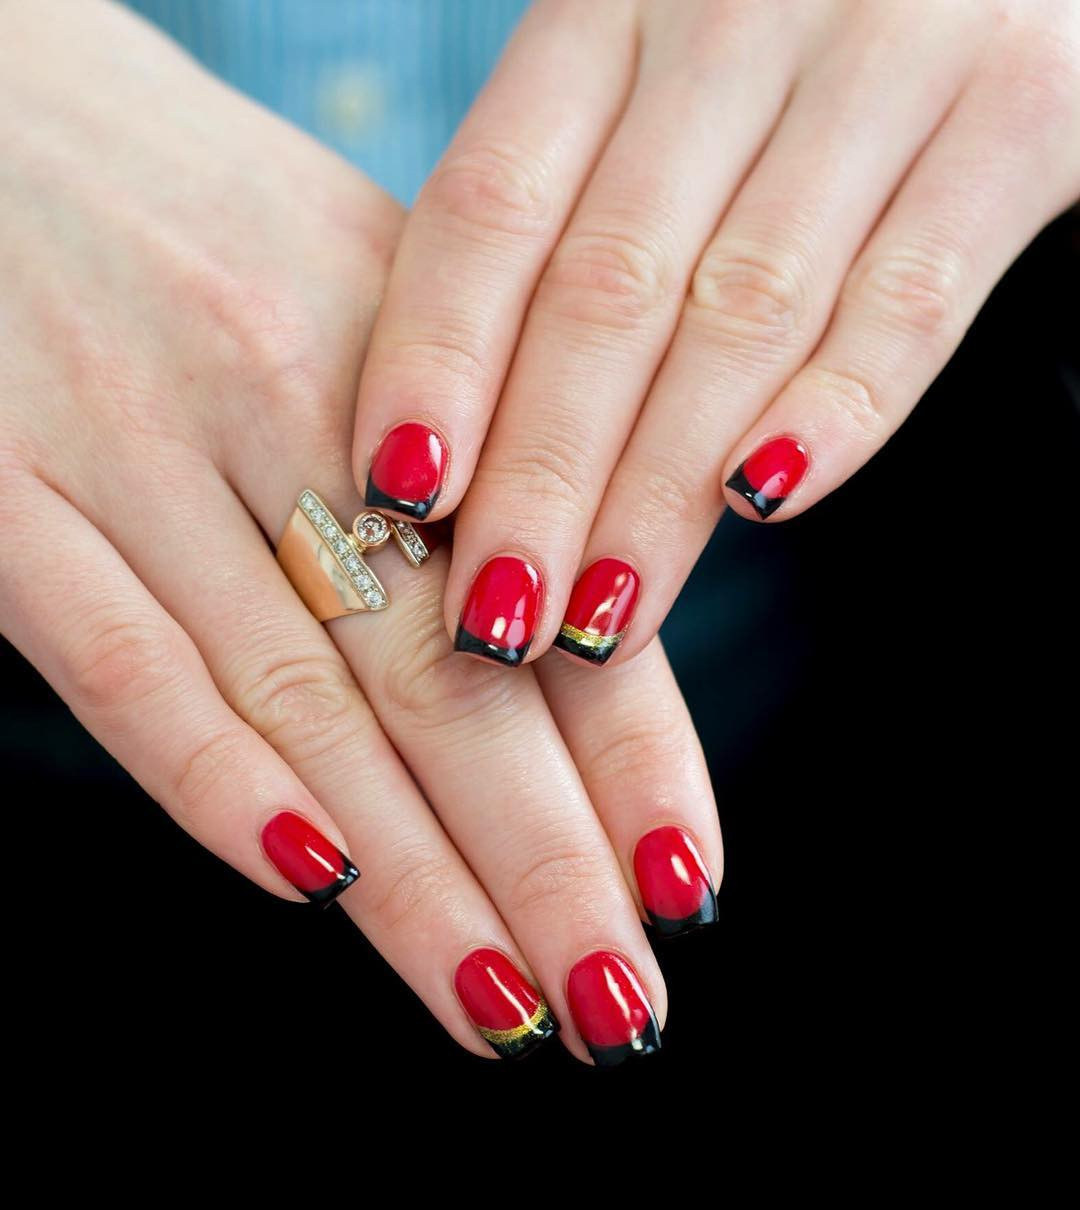 The 20 Best Ideas for Red and Black toe Nail Designs - Home, Family ...